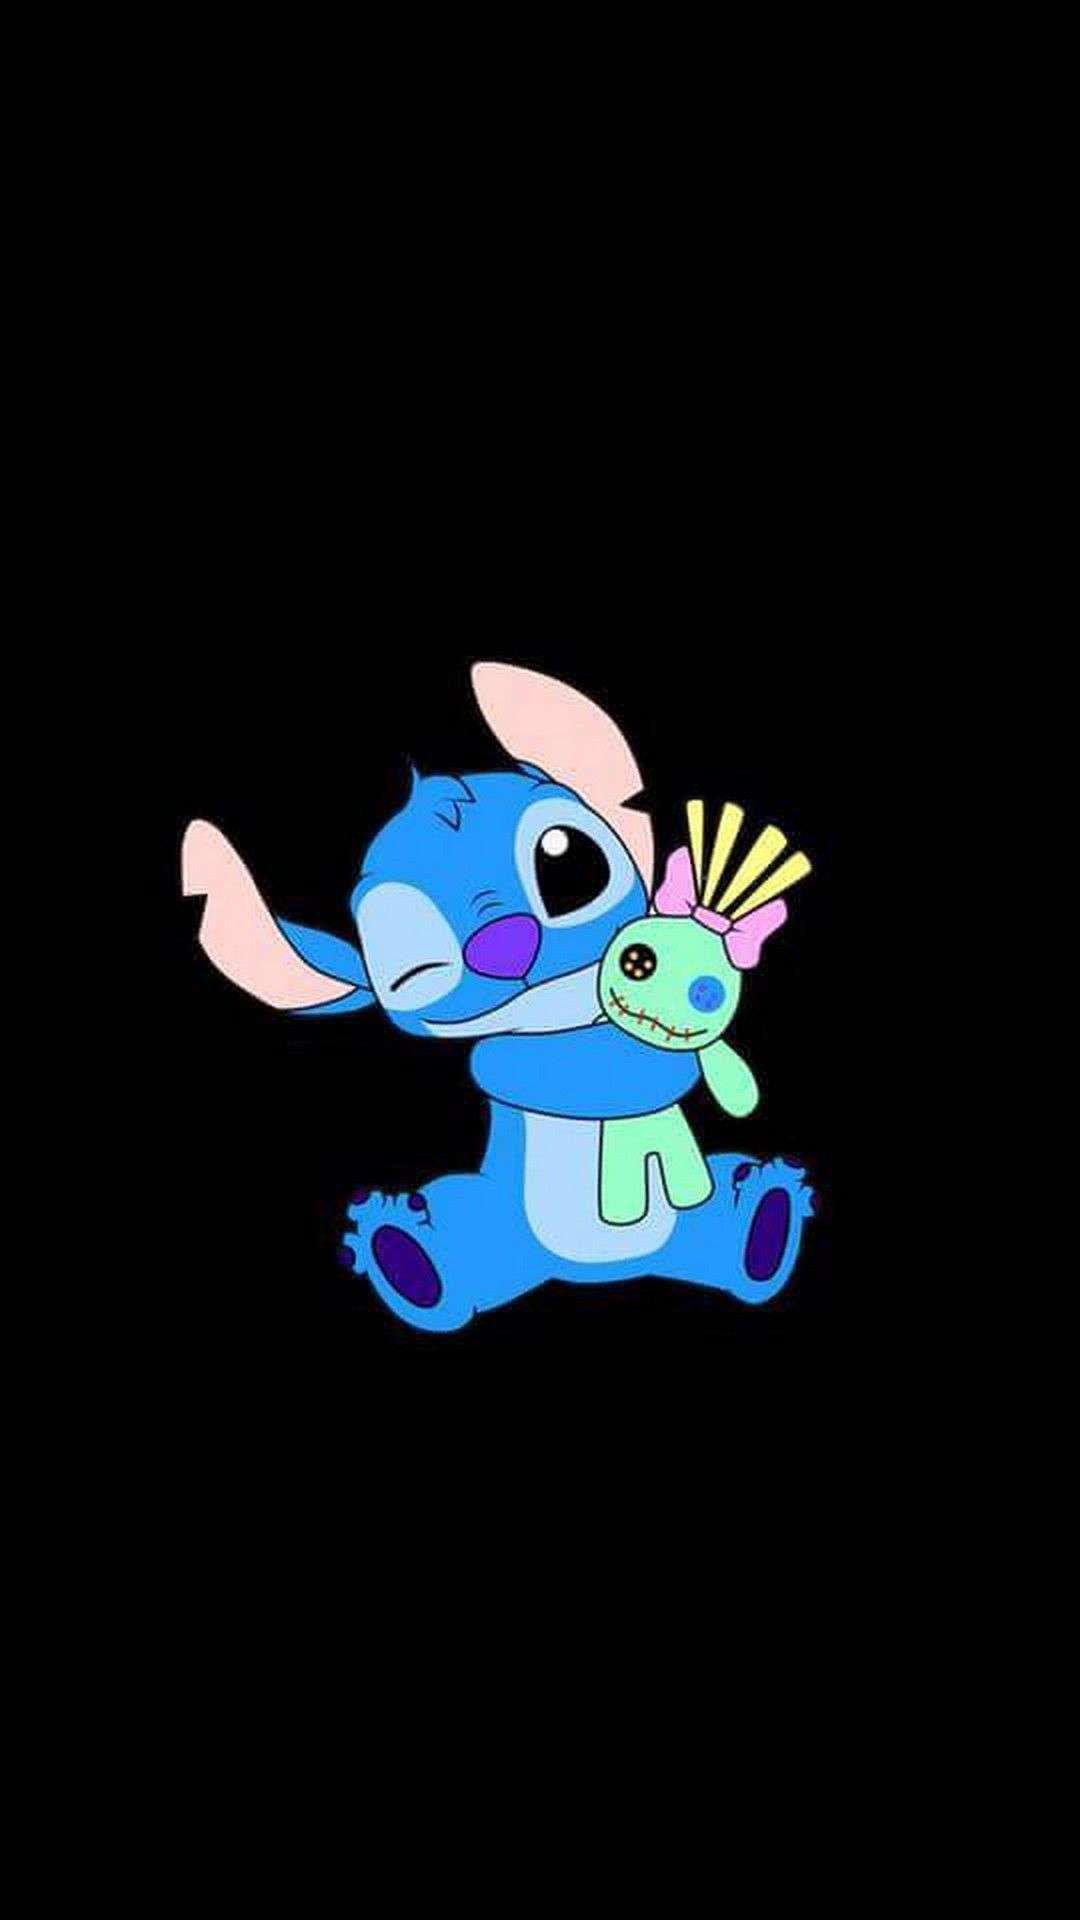 Stitch HD Wallpaper For Mobile Best Angel